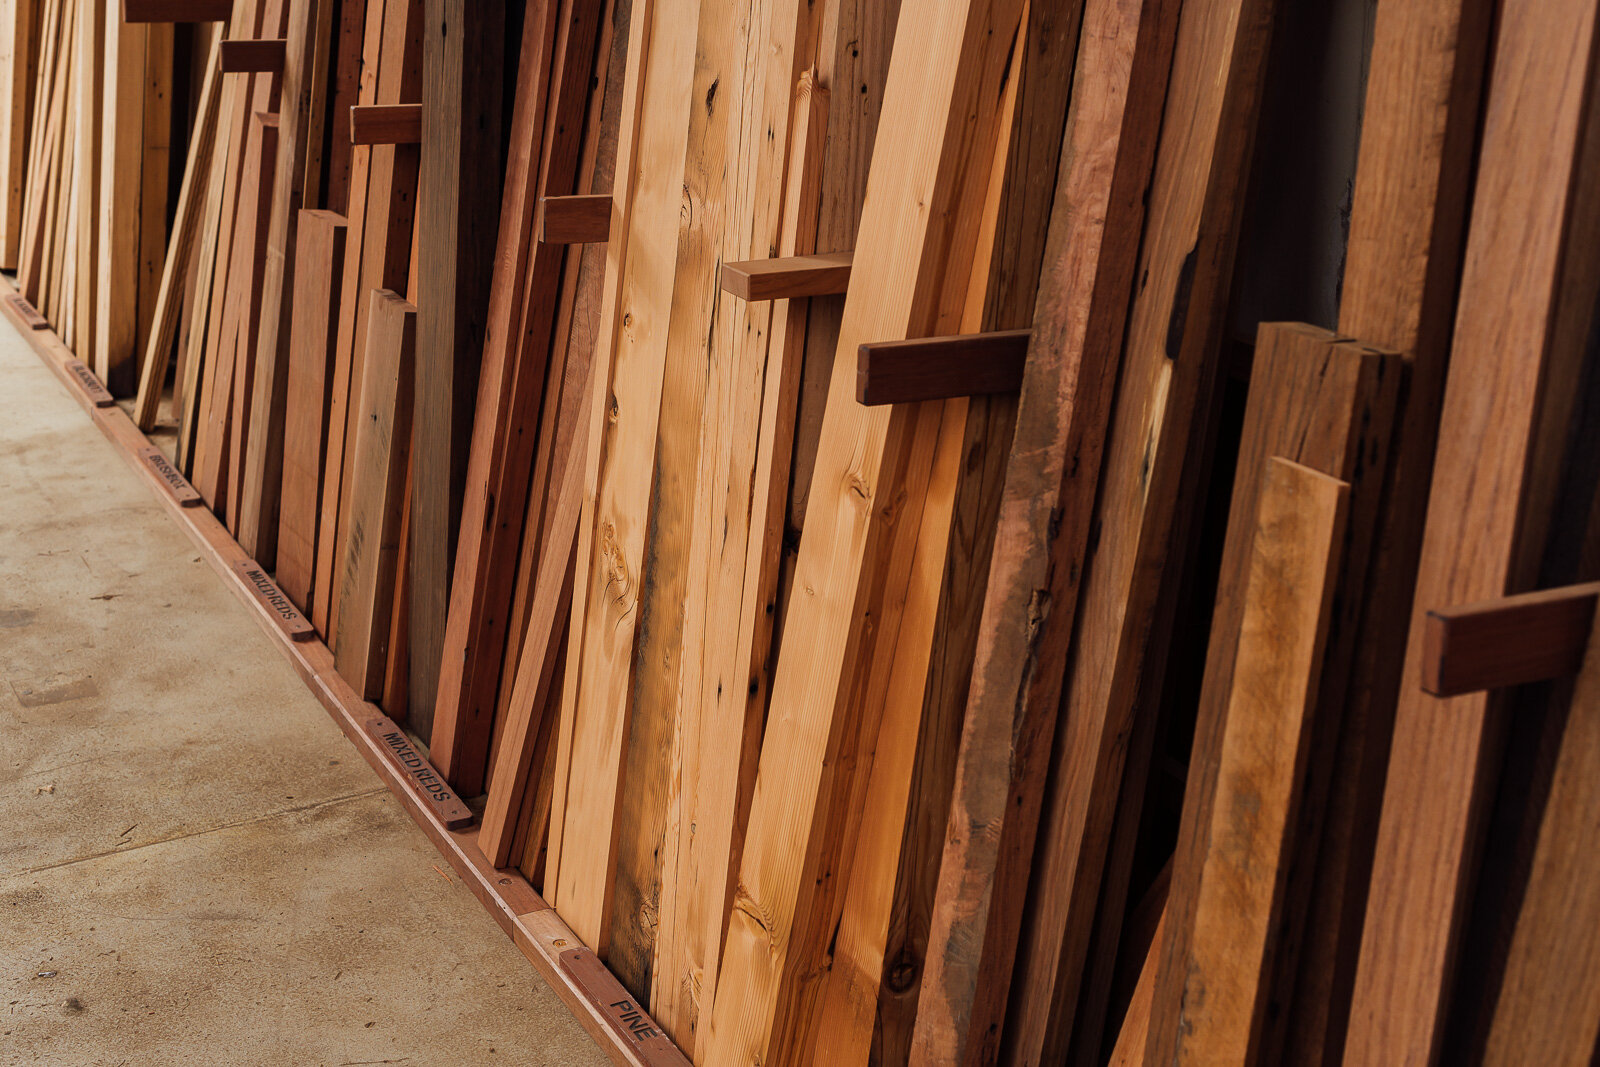 Different varieties and sizes of one-off timber slabs stored in a warehouse